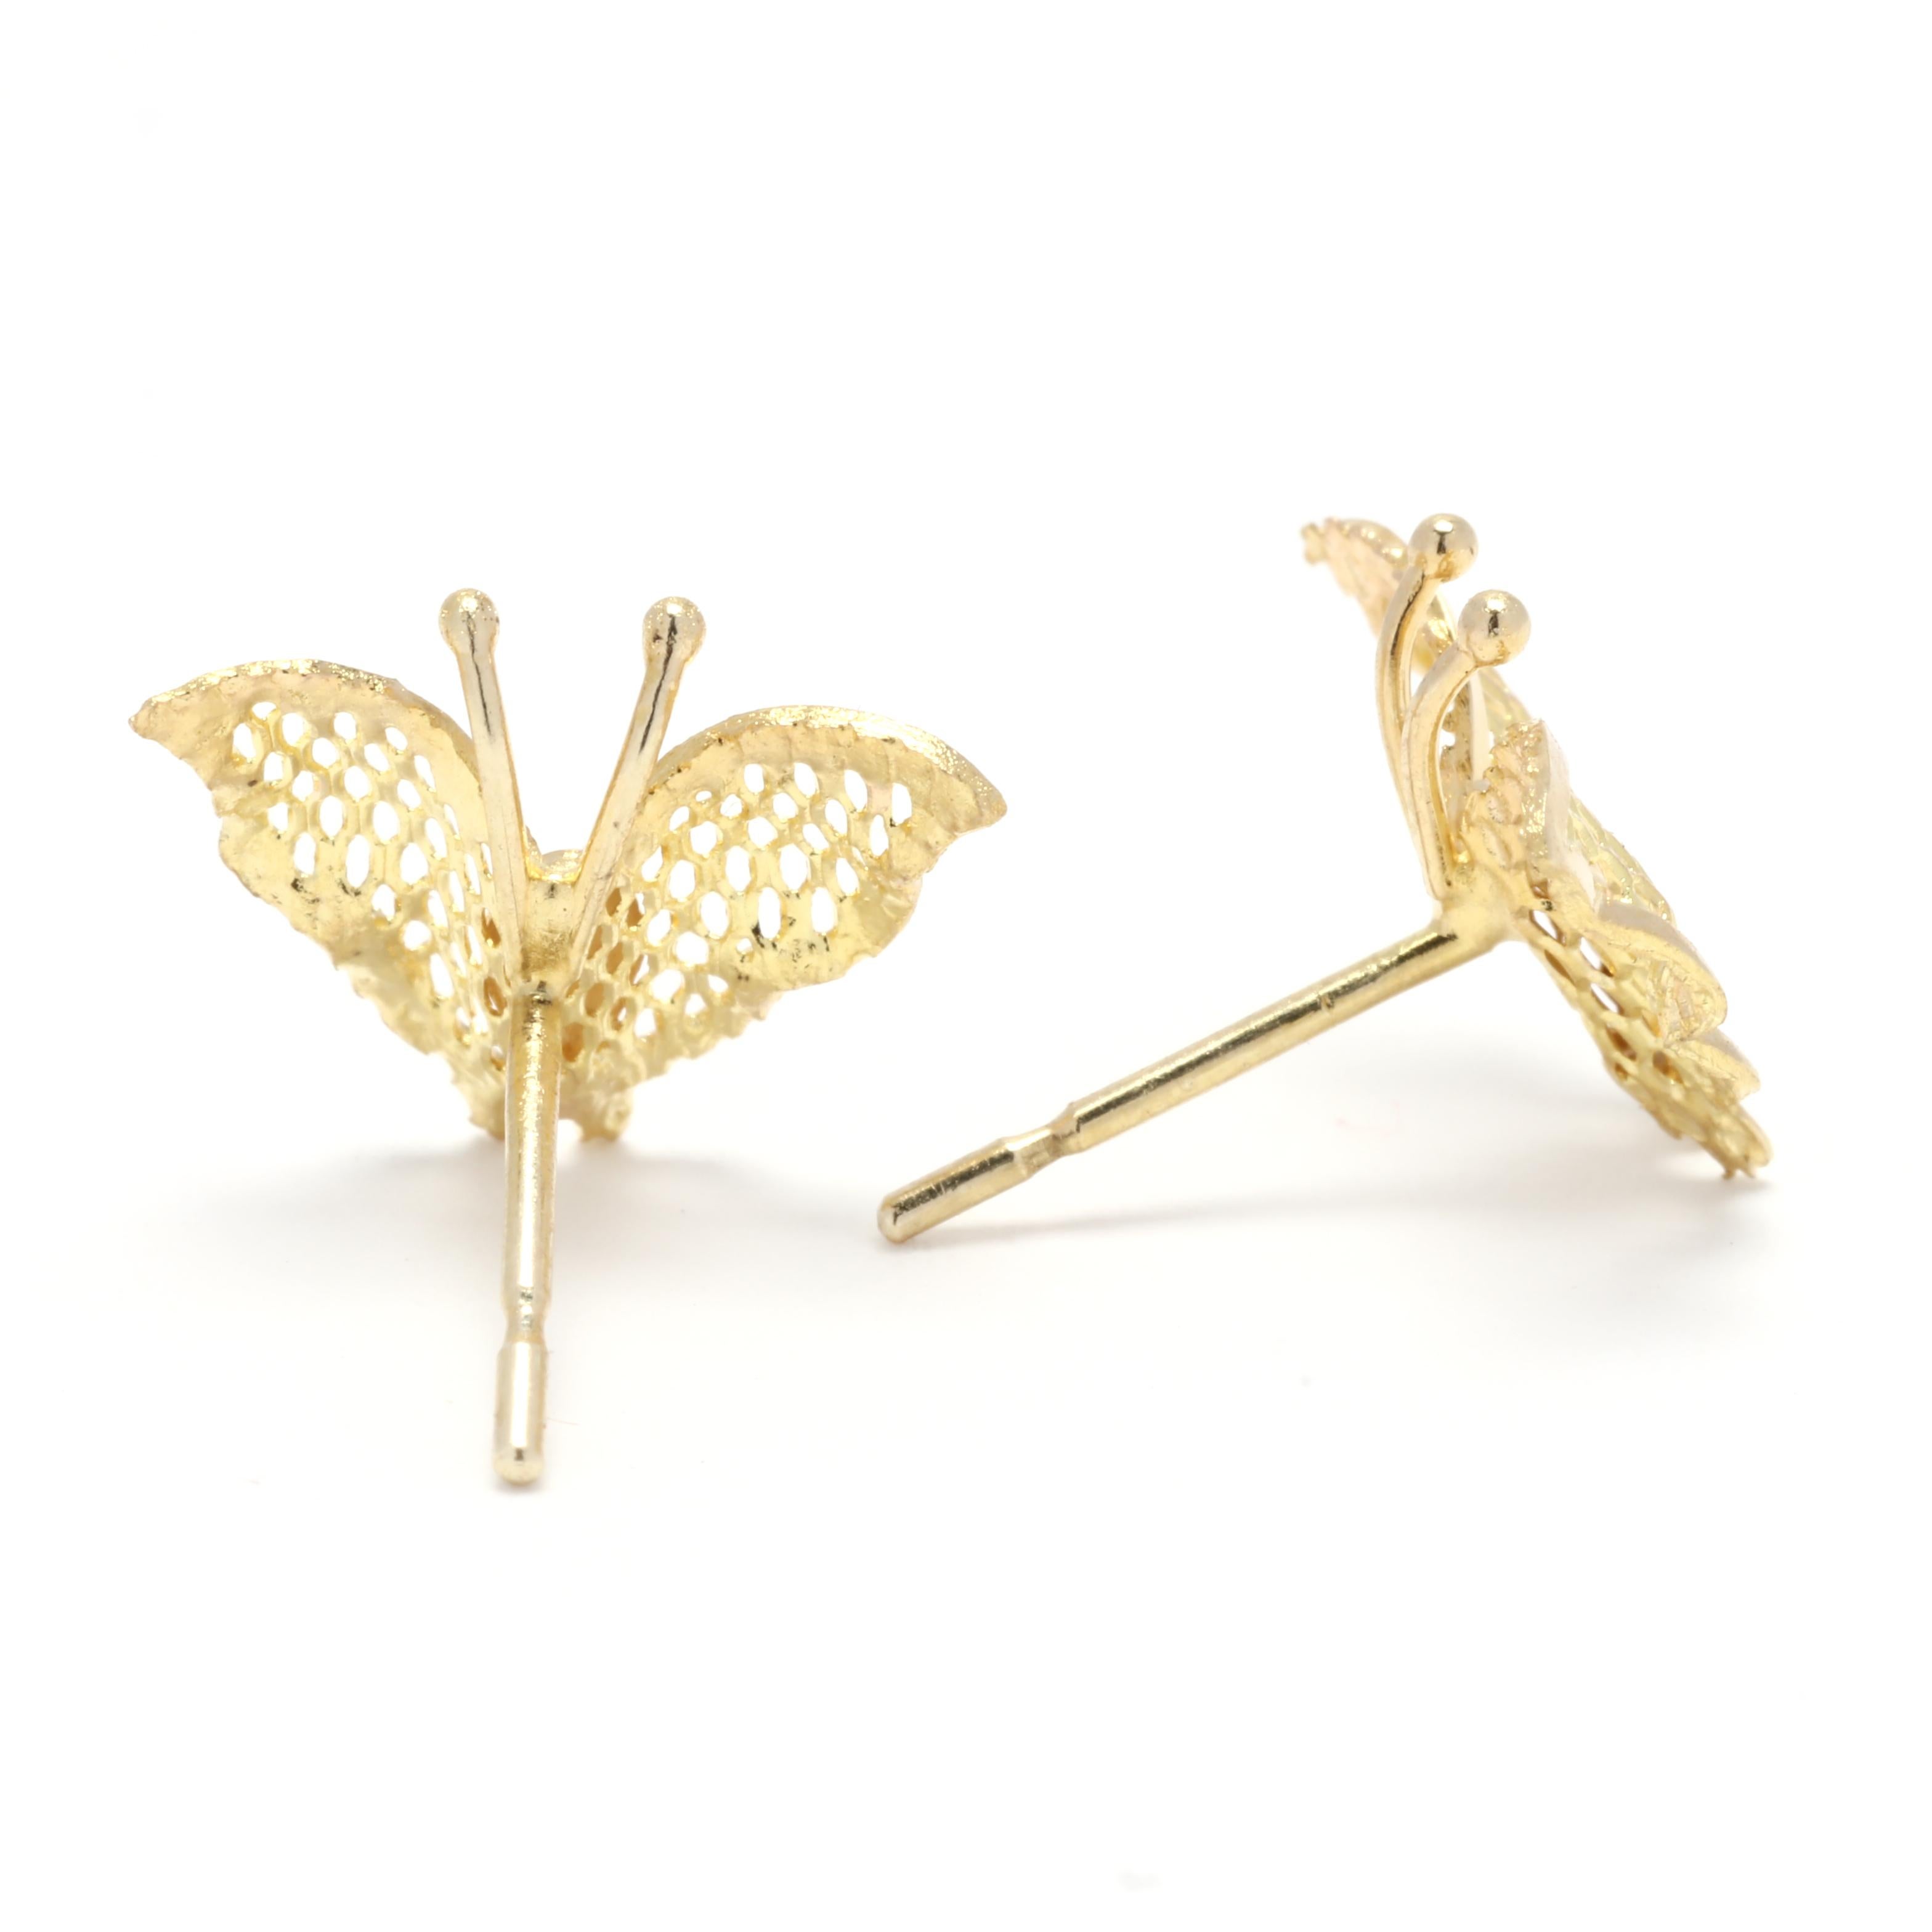 Add some feminine charm to your jewelry collection with these small gold butterfly stud earrings. Made from 14K yellow gold, these earrings are crafted with precision and attention to detail. The simple butterfly design adds a touch of whimsy and